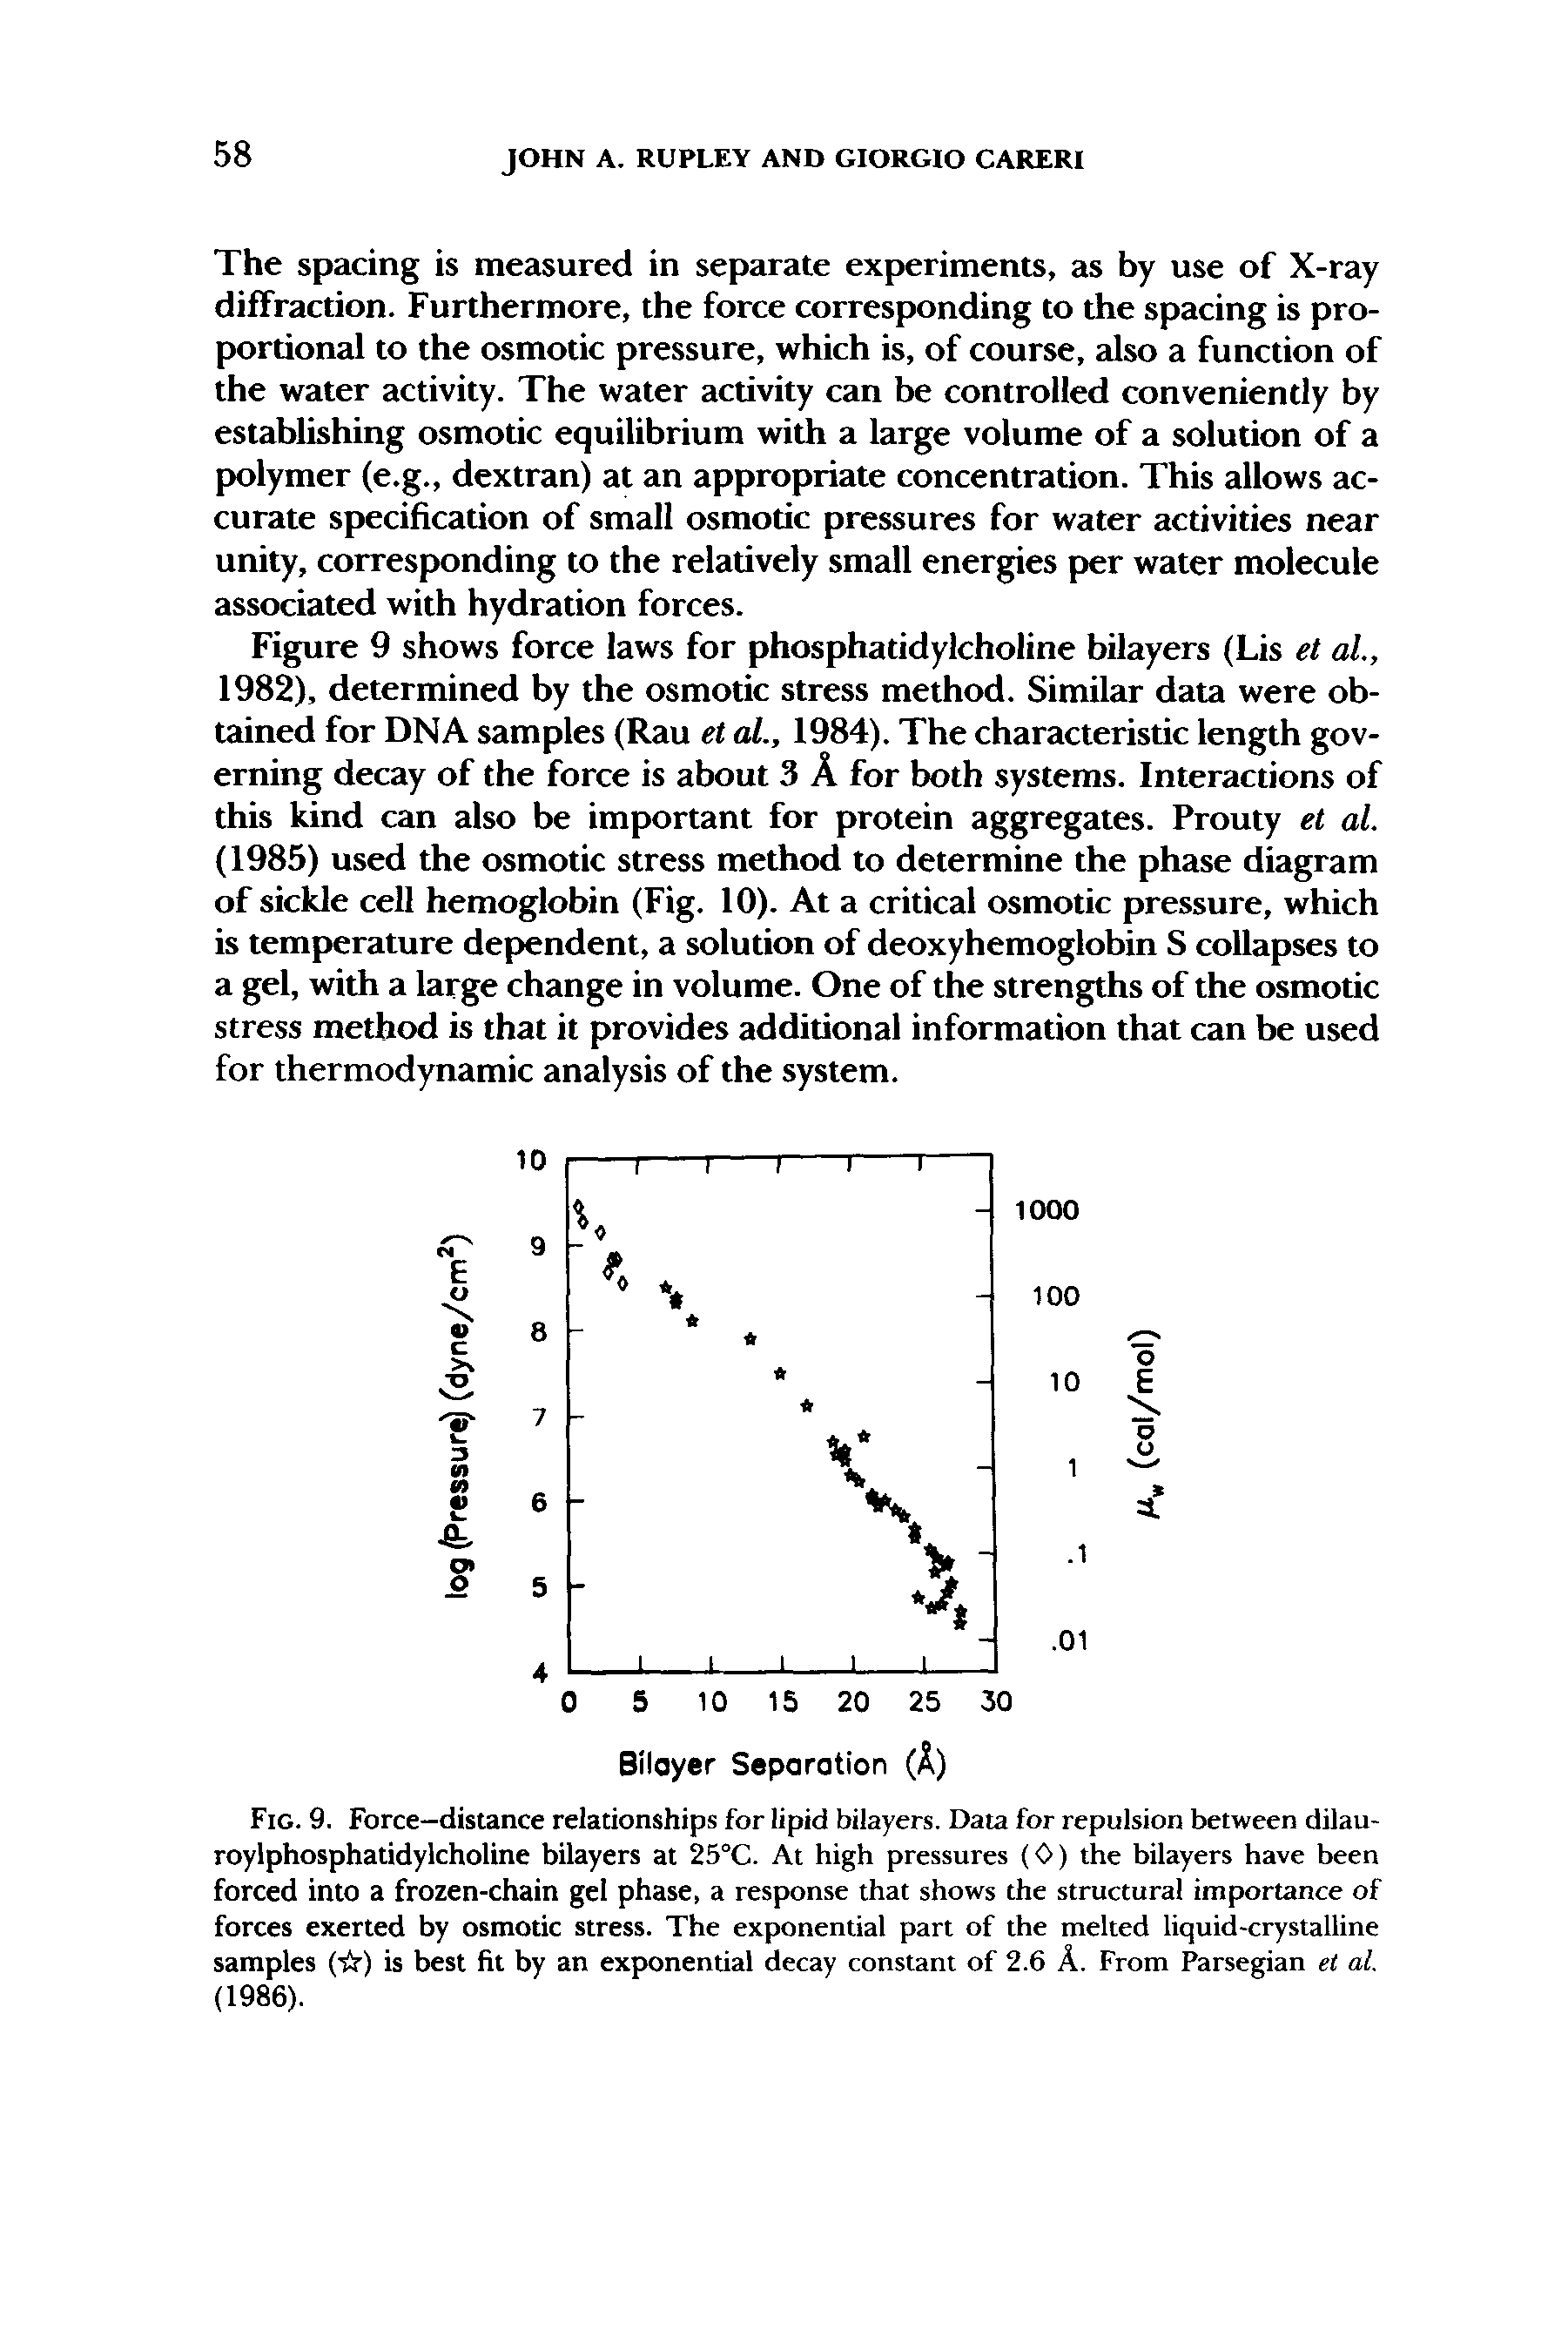 Figure 9 shows force laws for phosphatidylcholine bilayers (Lis et al, 1982), determined by the osmotic stress method. Similar data were obtained for DNA samples (Rau et al., 1984). The characteristic length governing decay of the force is about 3 A for both systems. Interactions of this kind can also be important for protein aggregates. Prouty et al. (1985) used the osmotic stress method to determine the phase diagram of sickle cell hemoglobin (Fig. 10). At a critical osmotic pressure, which is temperature dependent, a solution of deoxyhemoglobin S collapses to a gel, with a large change in volume. One of the strengths of the osmotic stress method is that it provides additional information that can be used for thermodynamic analysis of the system.